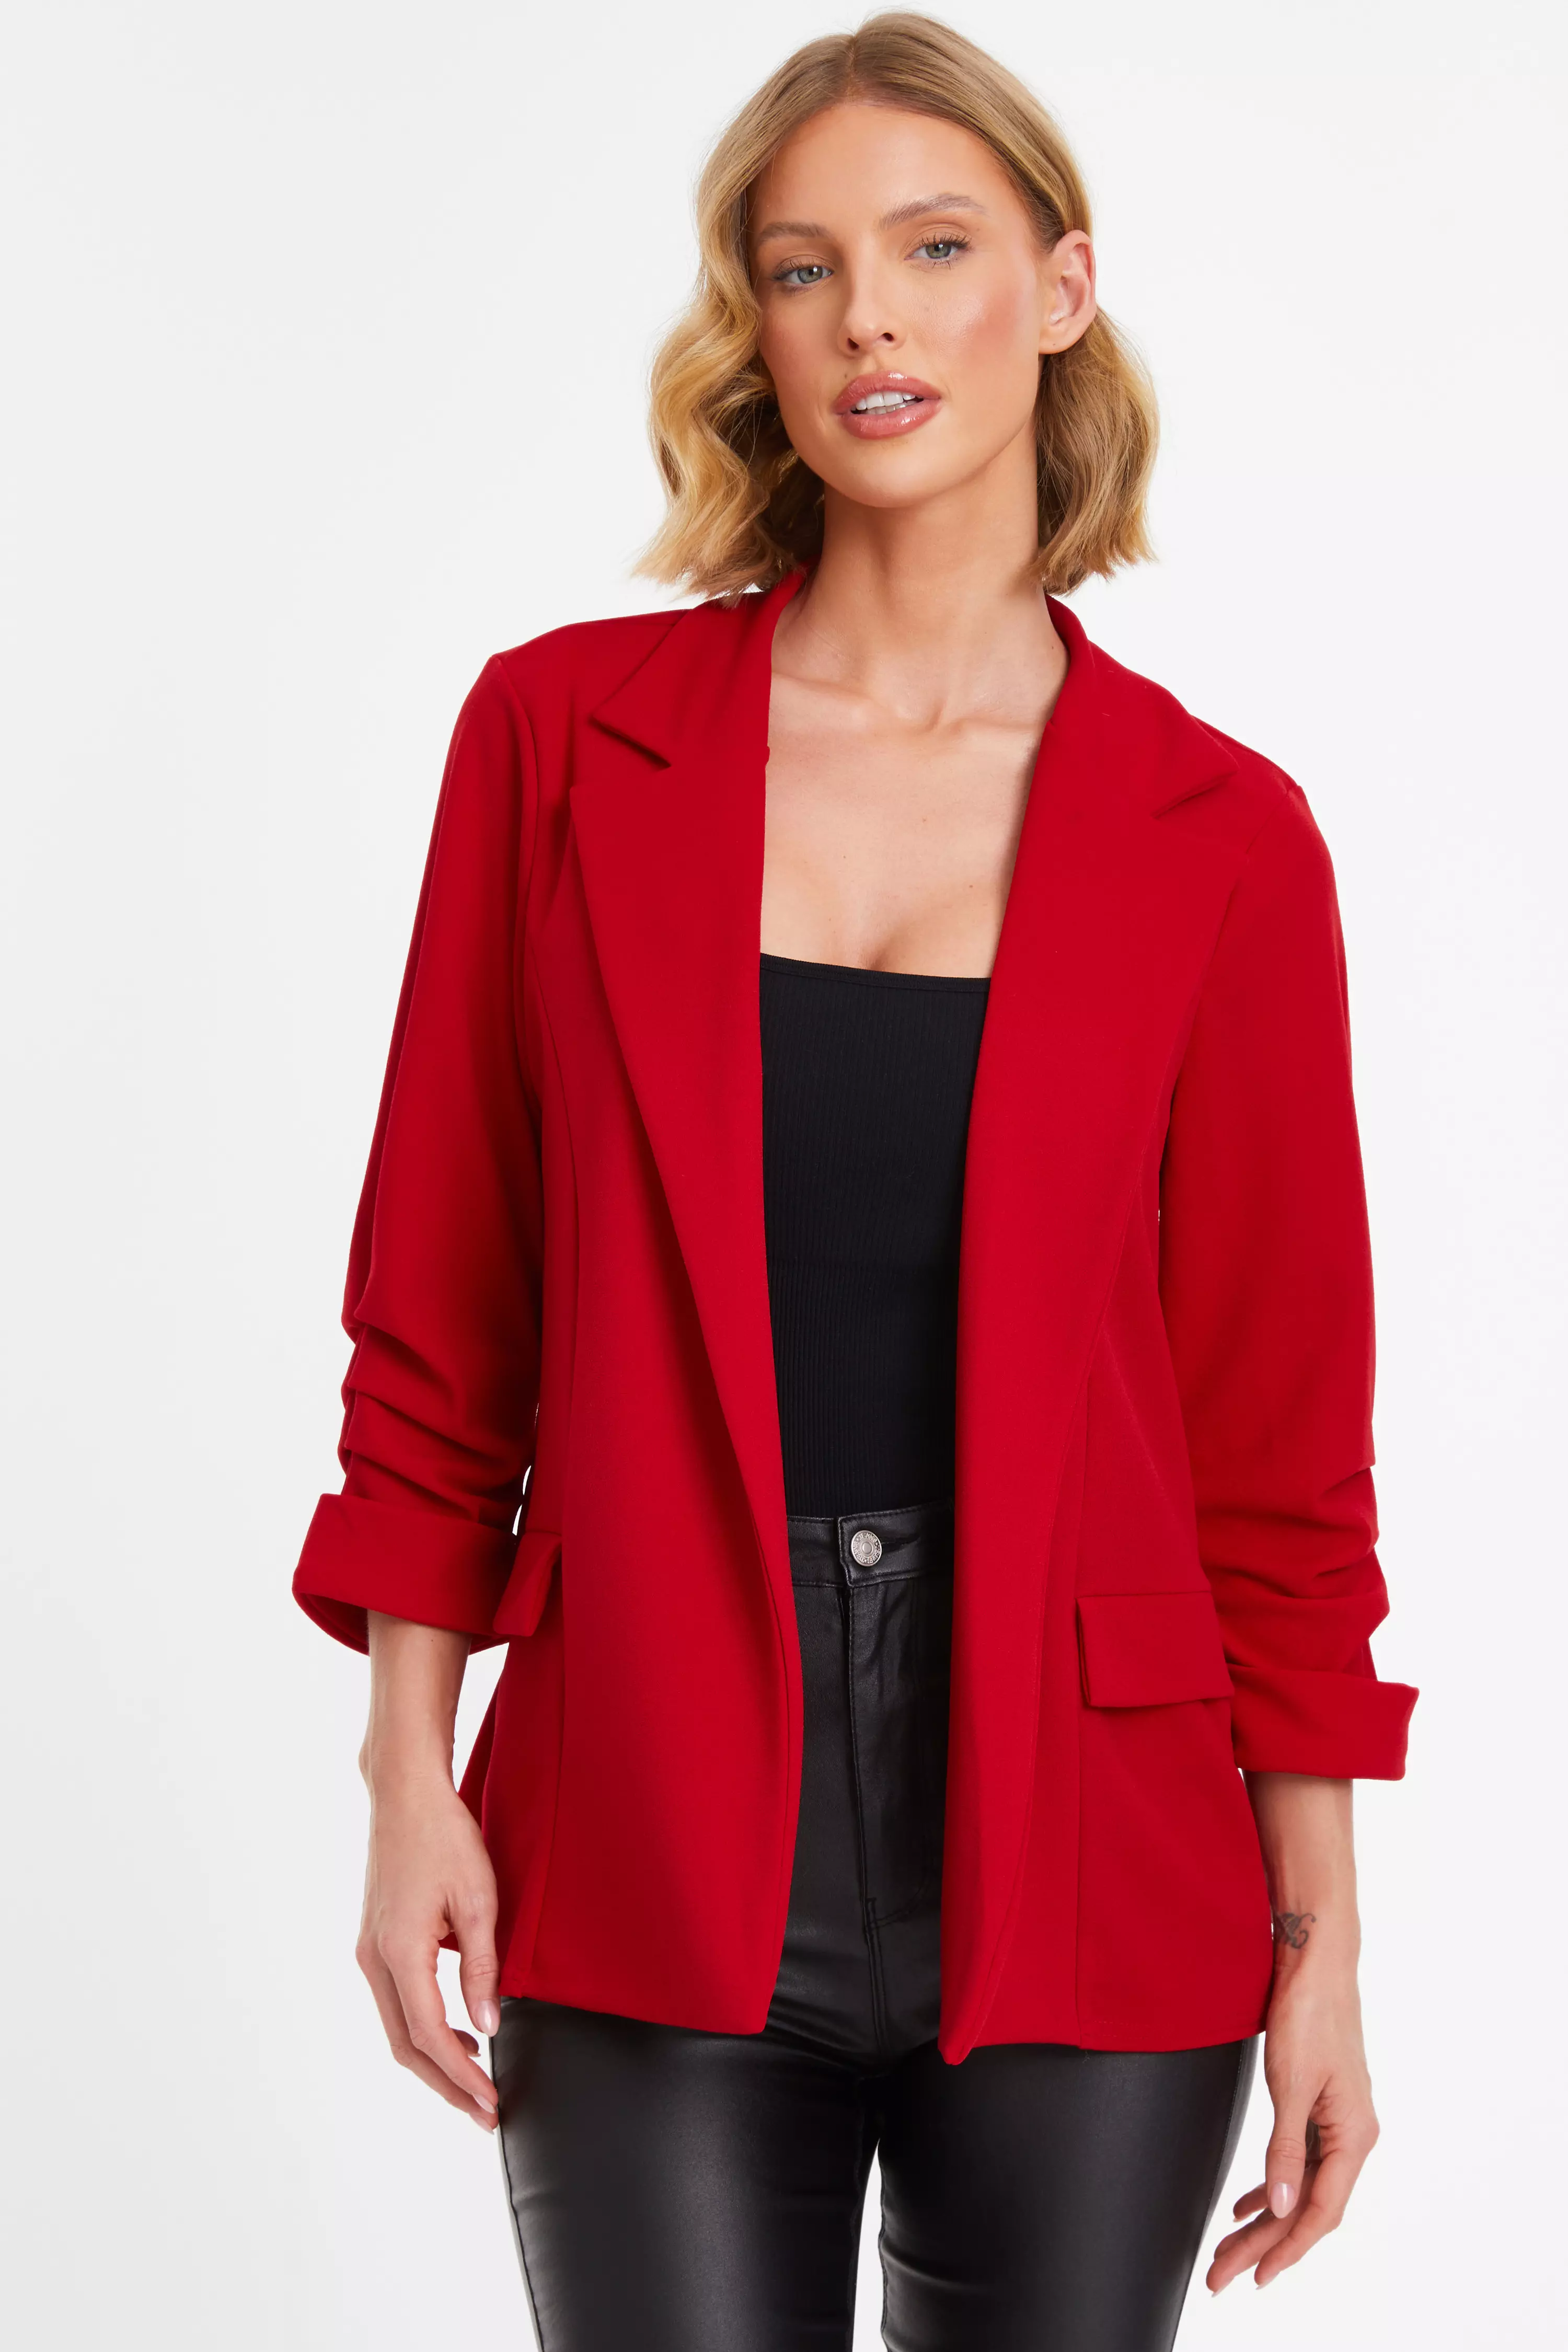 Red Ruched Sleeve Blazer - QUIZ Clothing